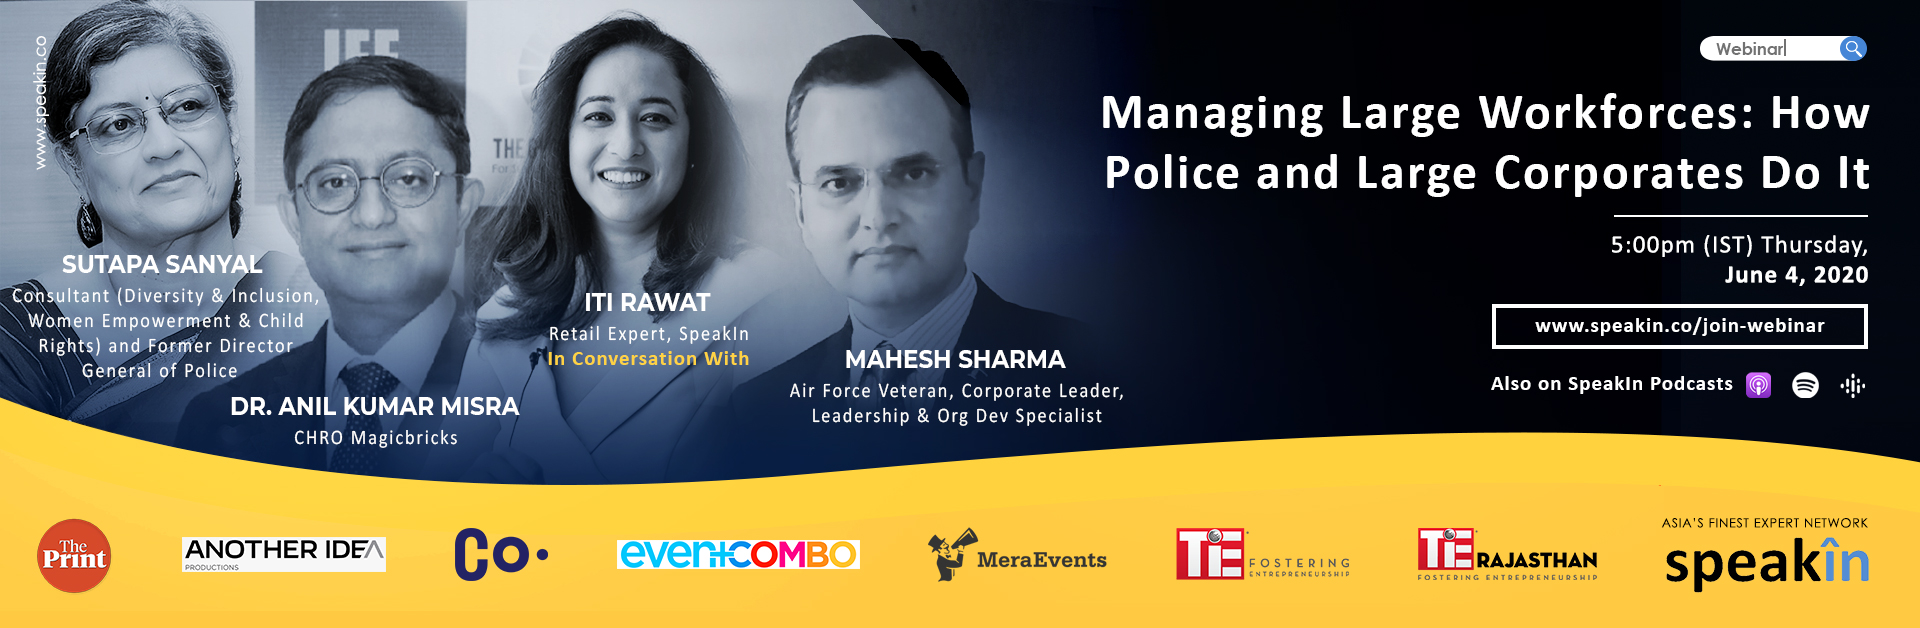 Managing Large Workforces: How Police and Large Corporates Do It